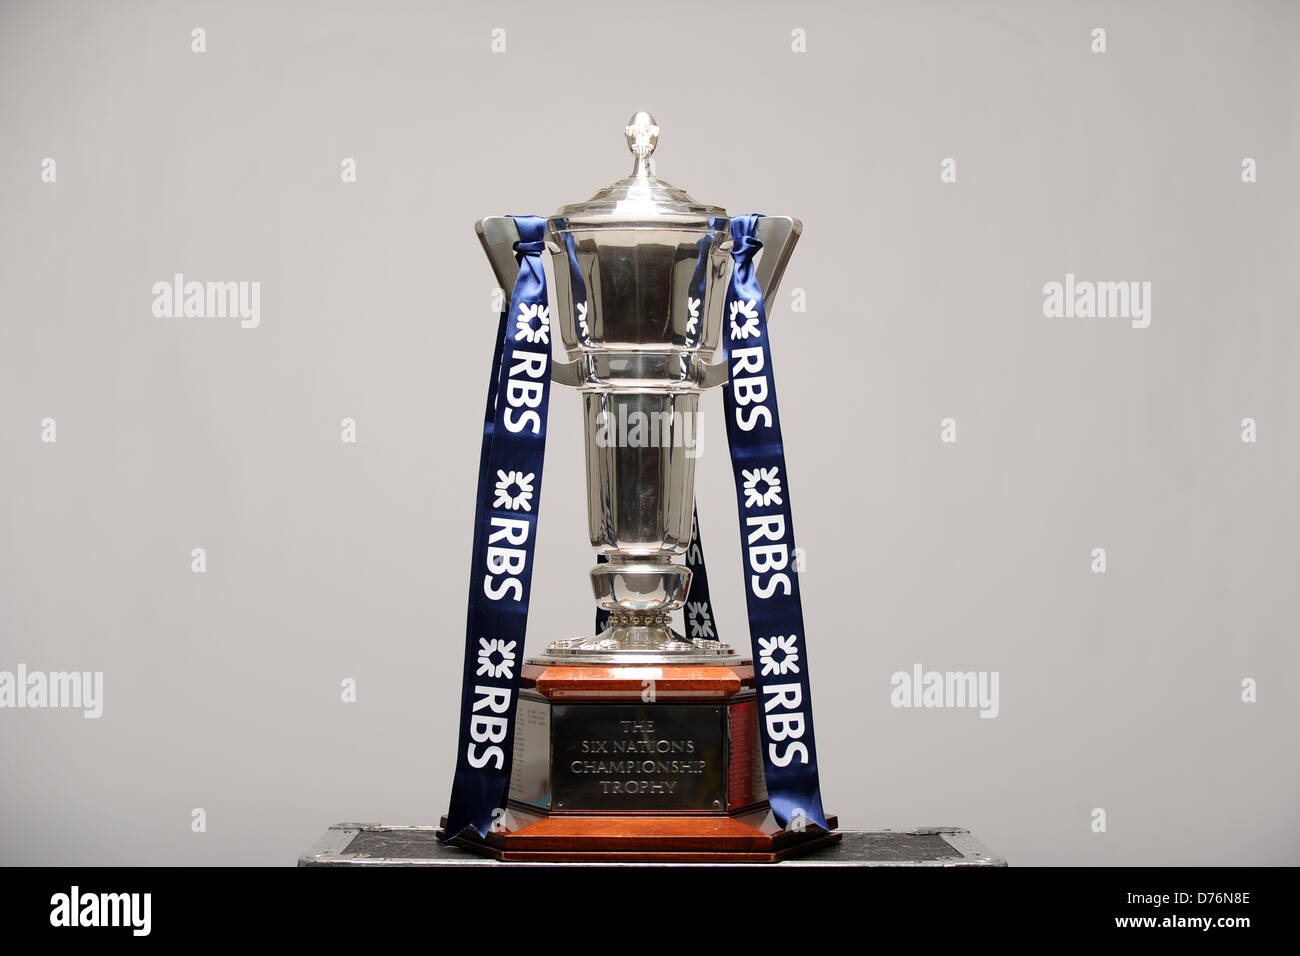 The RBS Six Nations trophy. Stock Photo